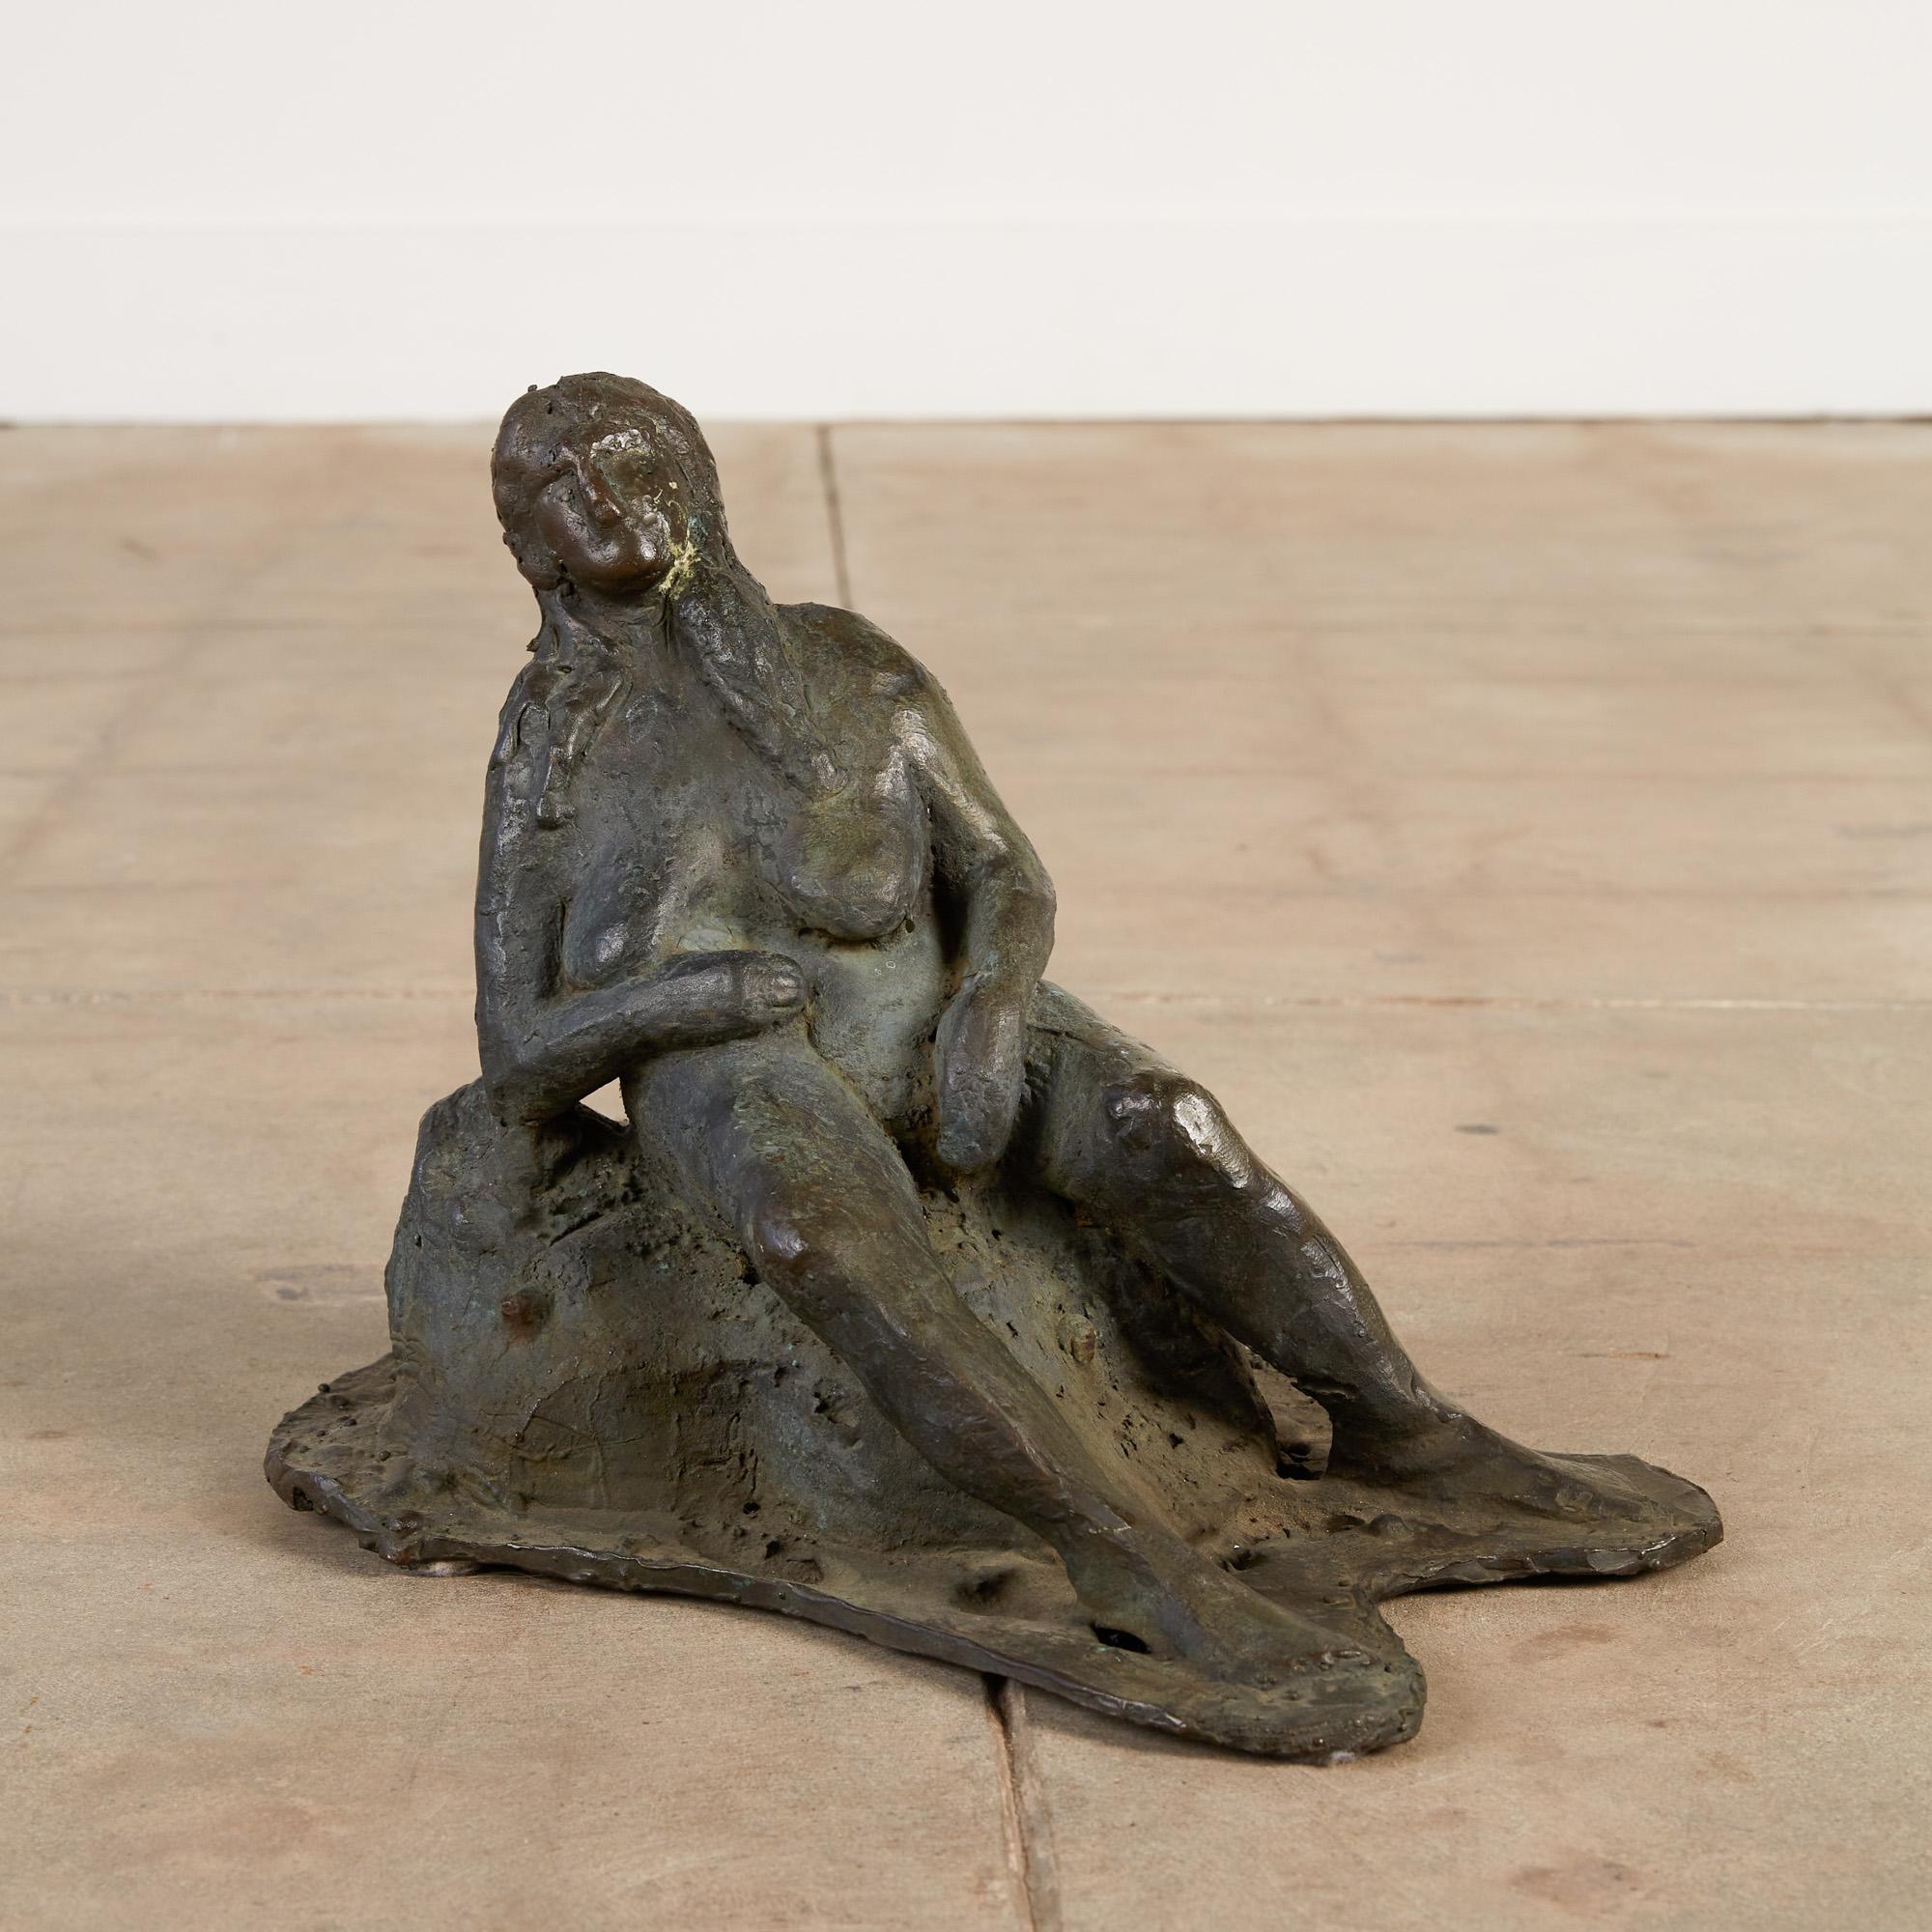 This cast bronze sculpture depicts a woman, captured in a moment after she just finished a swim at her favourite lake. She’s gazing upon the view, reclining on a rock as she air dries enough to be able to put her clothes back on and walk home in the